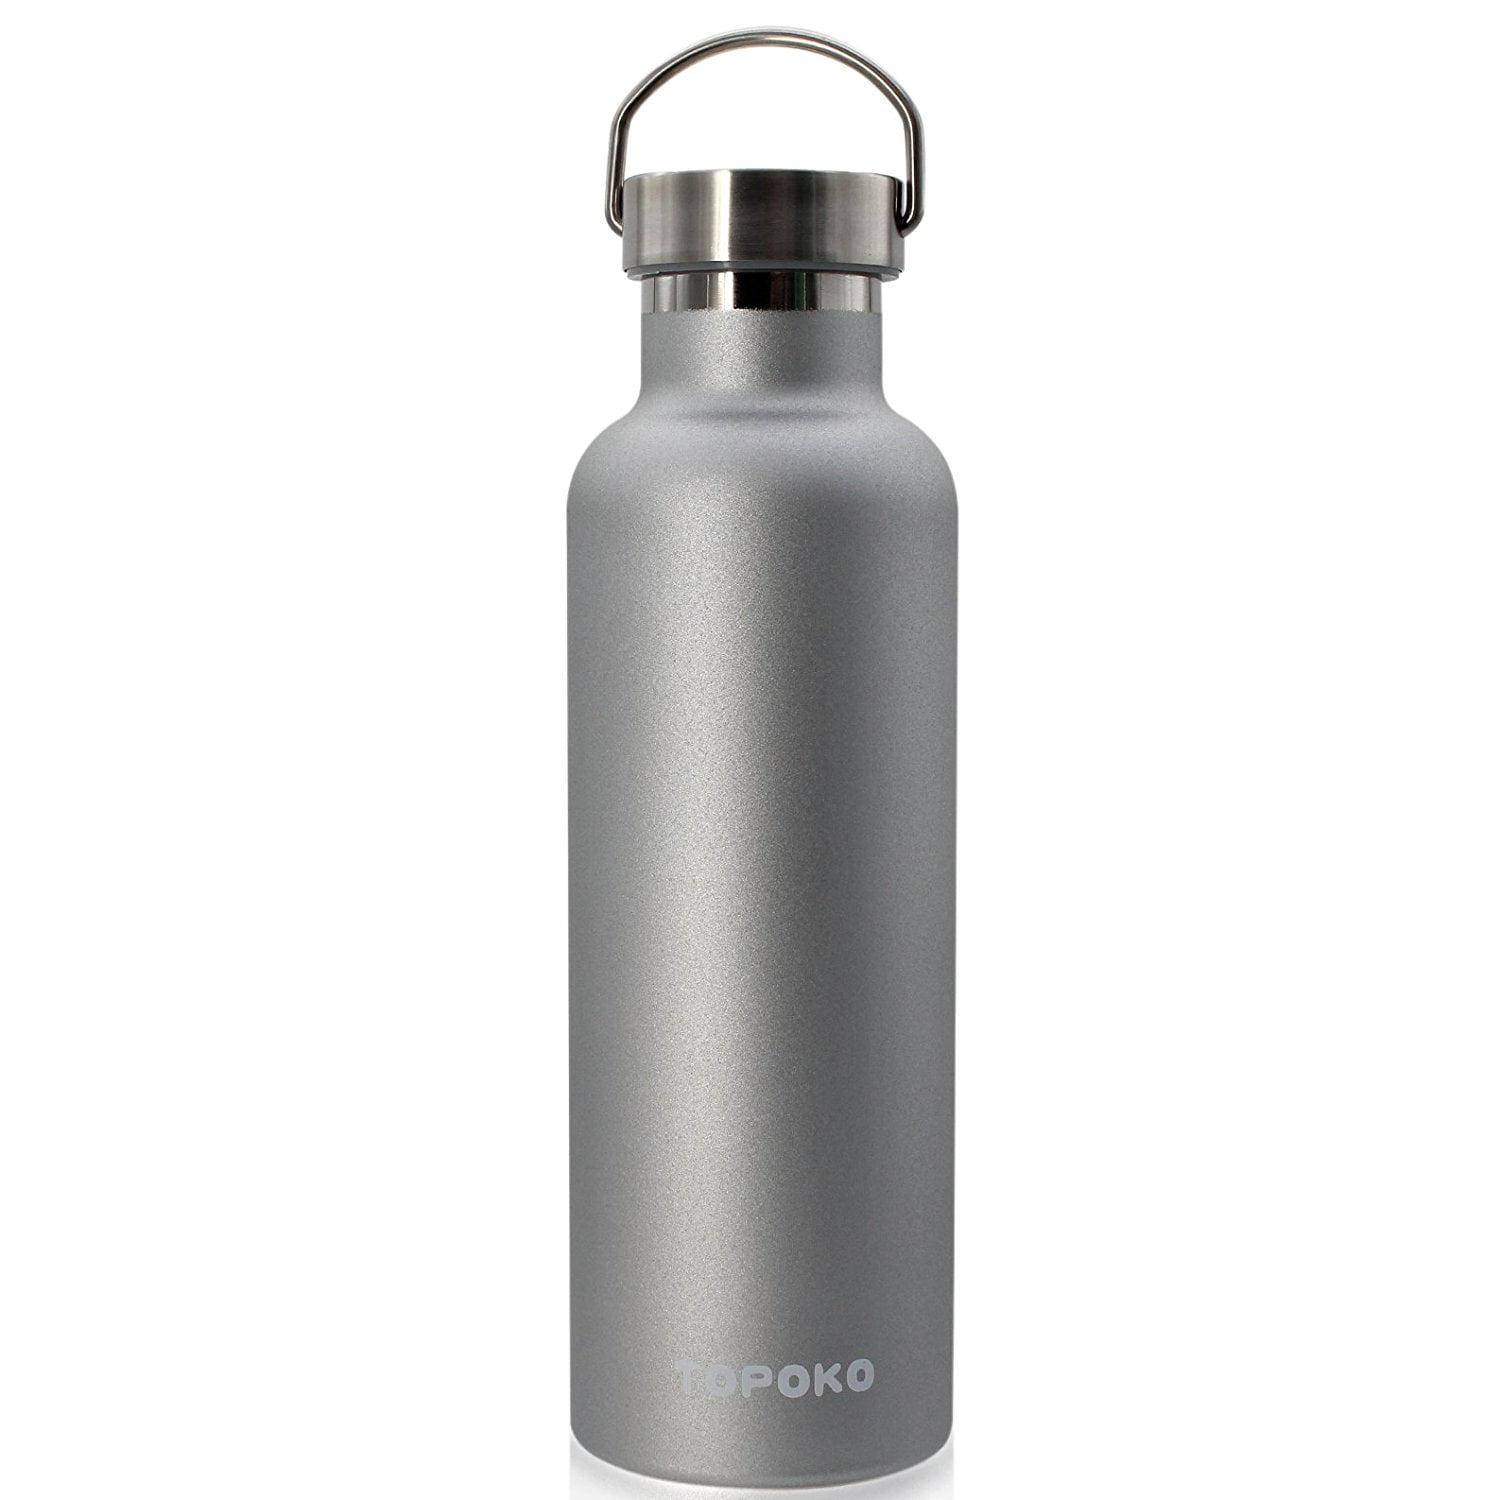 Sweat Proof Vacuum Insulated Stainless Steel With Carrying Handle-25 OZ Leak Proof Vacuum Insulated TOPOKO AUTOFLIP Stainless Steel Bottle Double Wall Water Bottle Wide Mouth